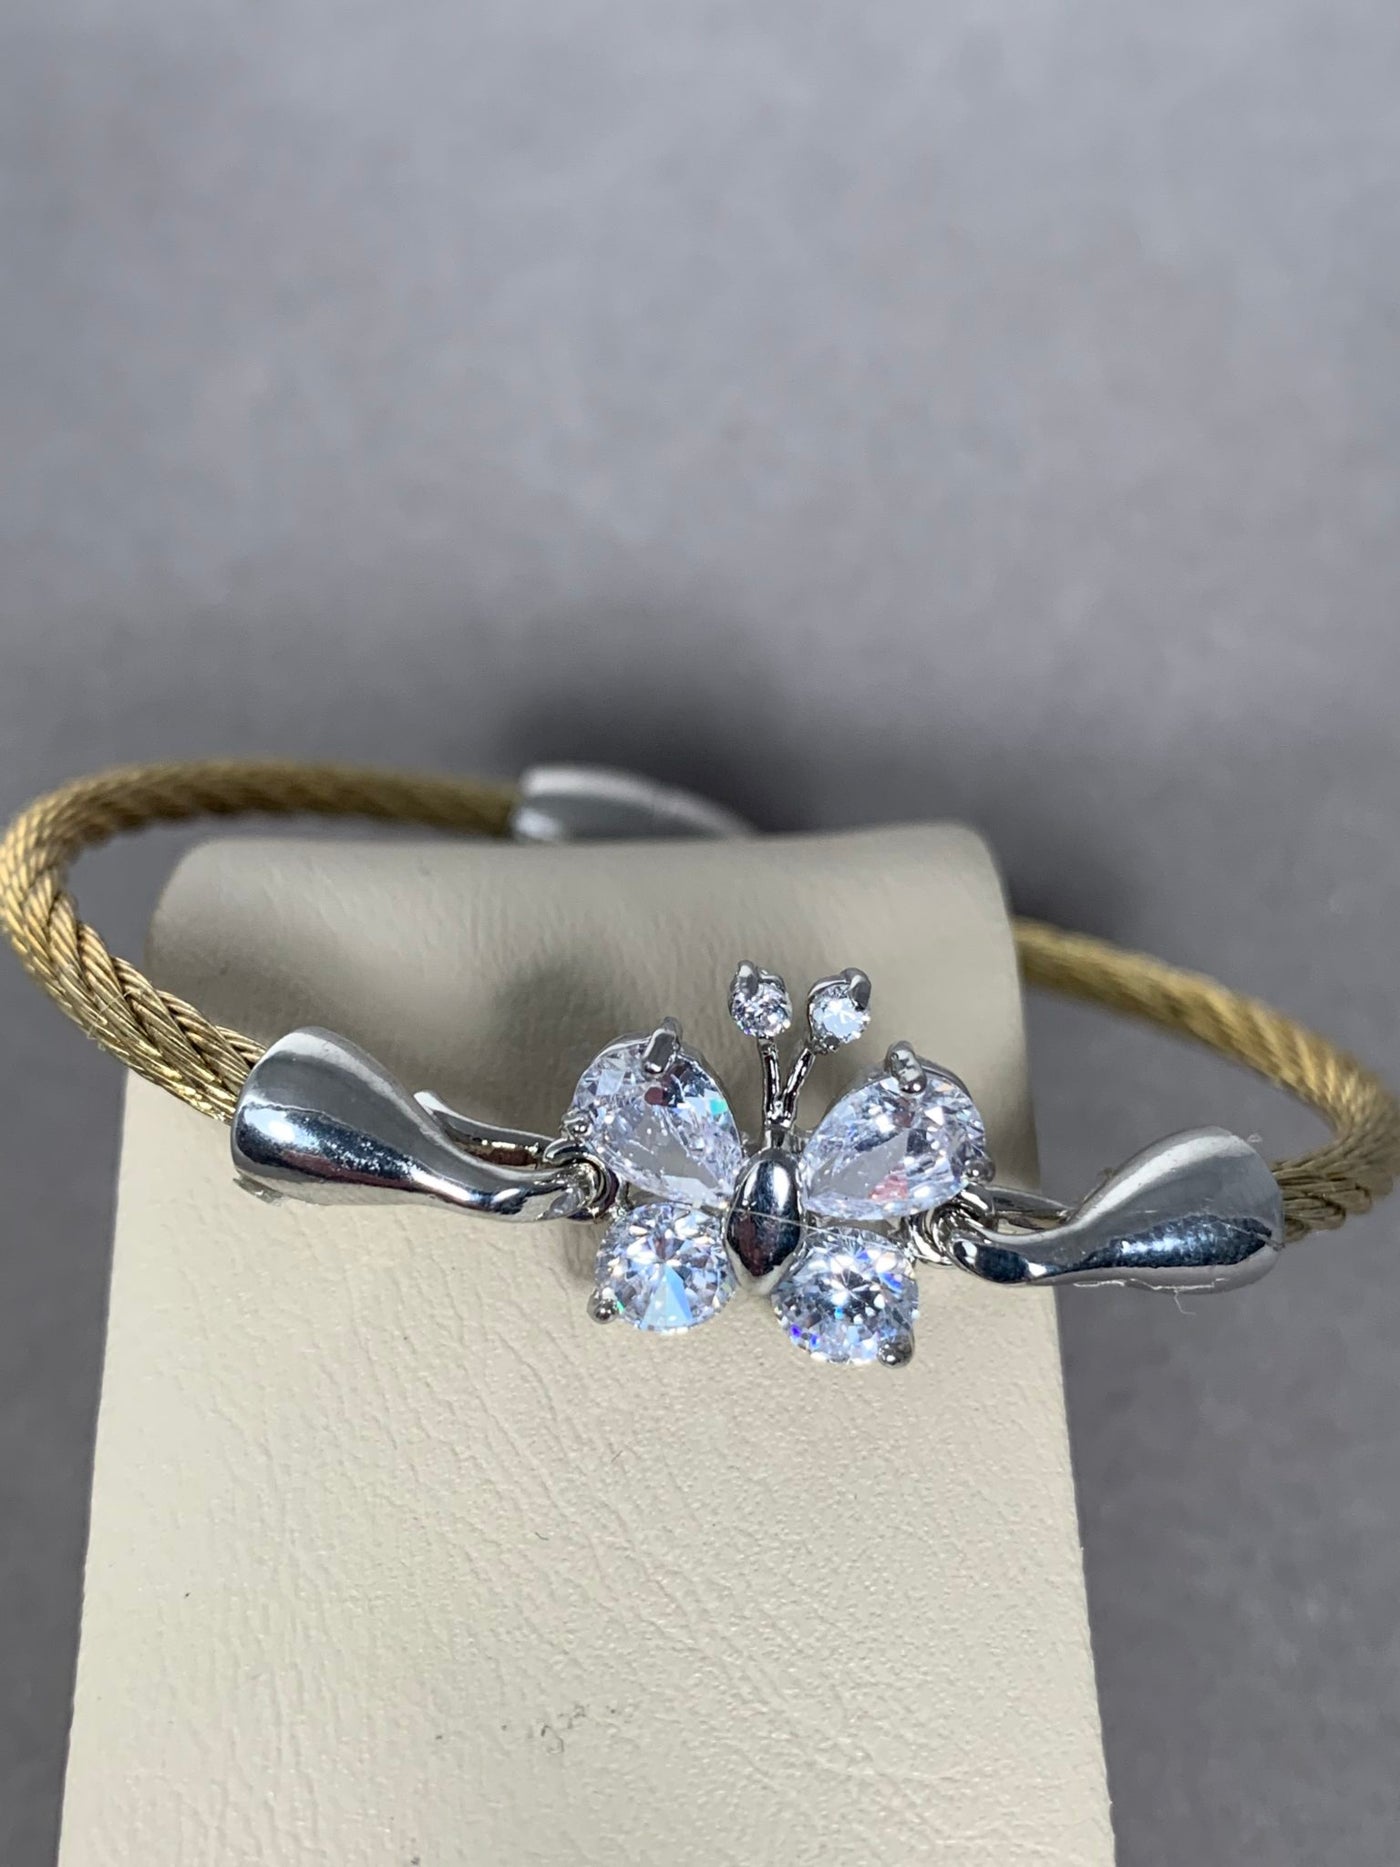 Gold Tone Wire Bangle Bracelet featuring Clear Crystal Butterfly